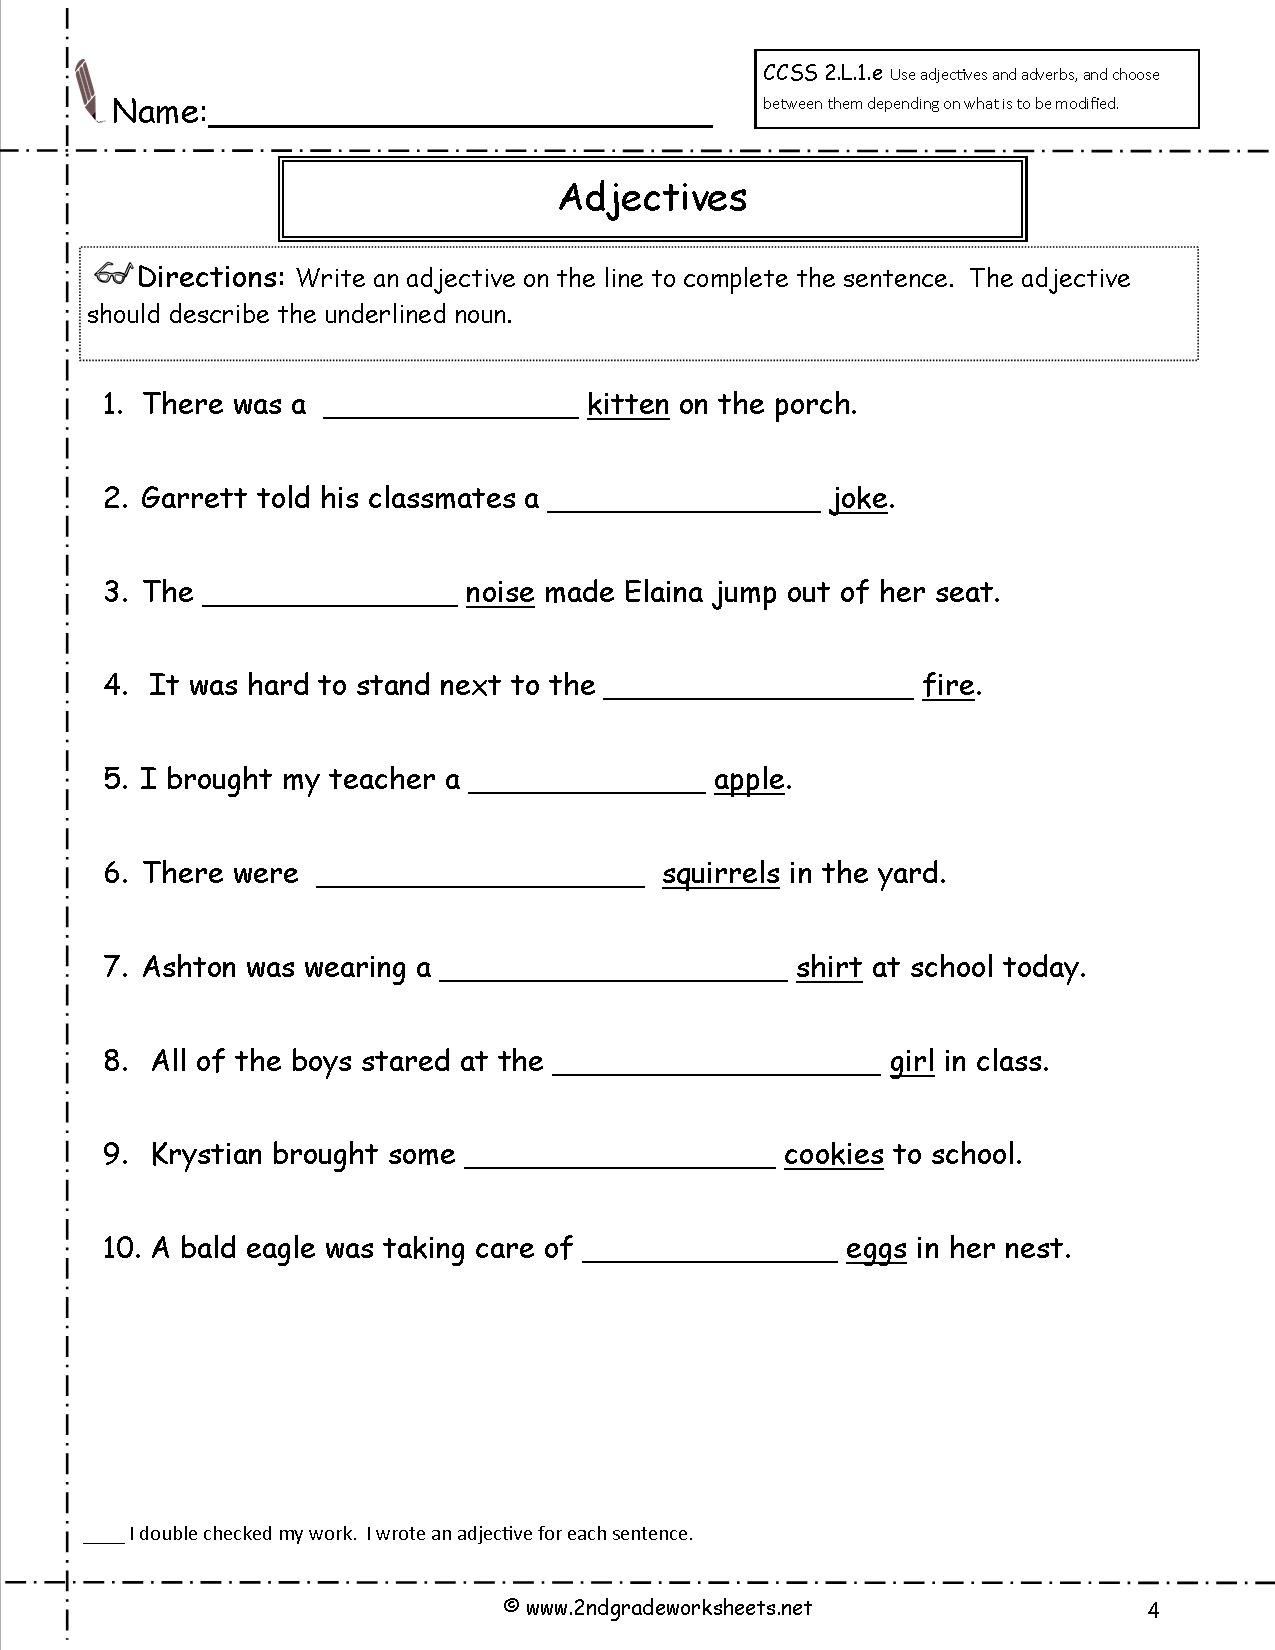 Adjective Worksheet For 7th Class